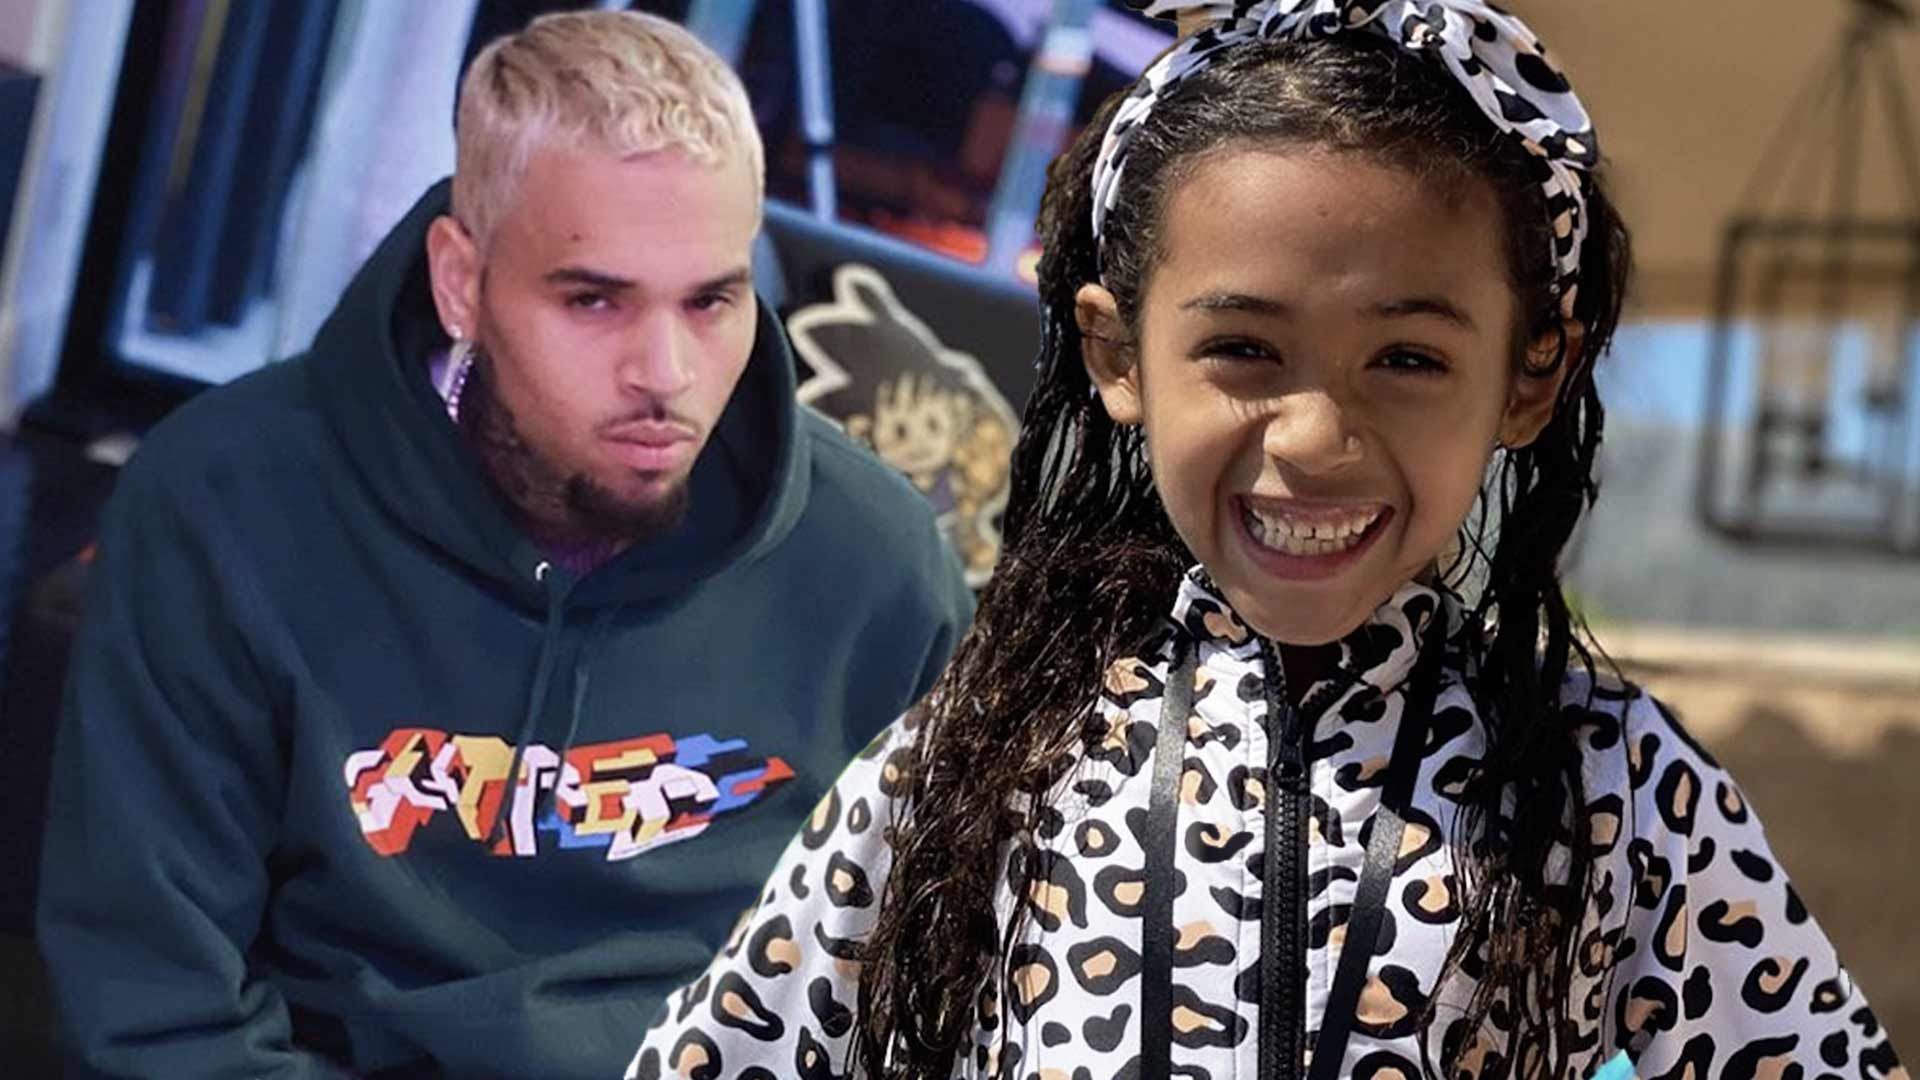 Chris Browns Daughter Royalty Busts Moves Better Than Daddy In Epic